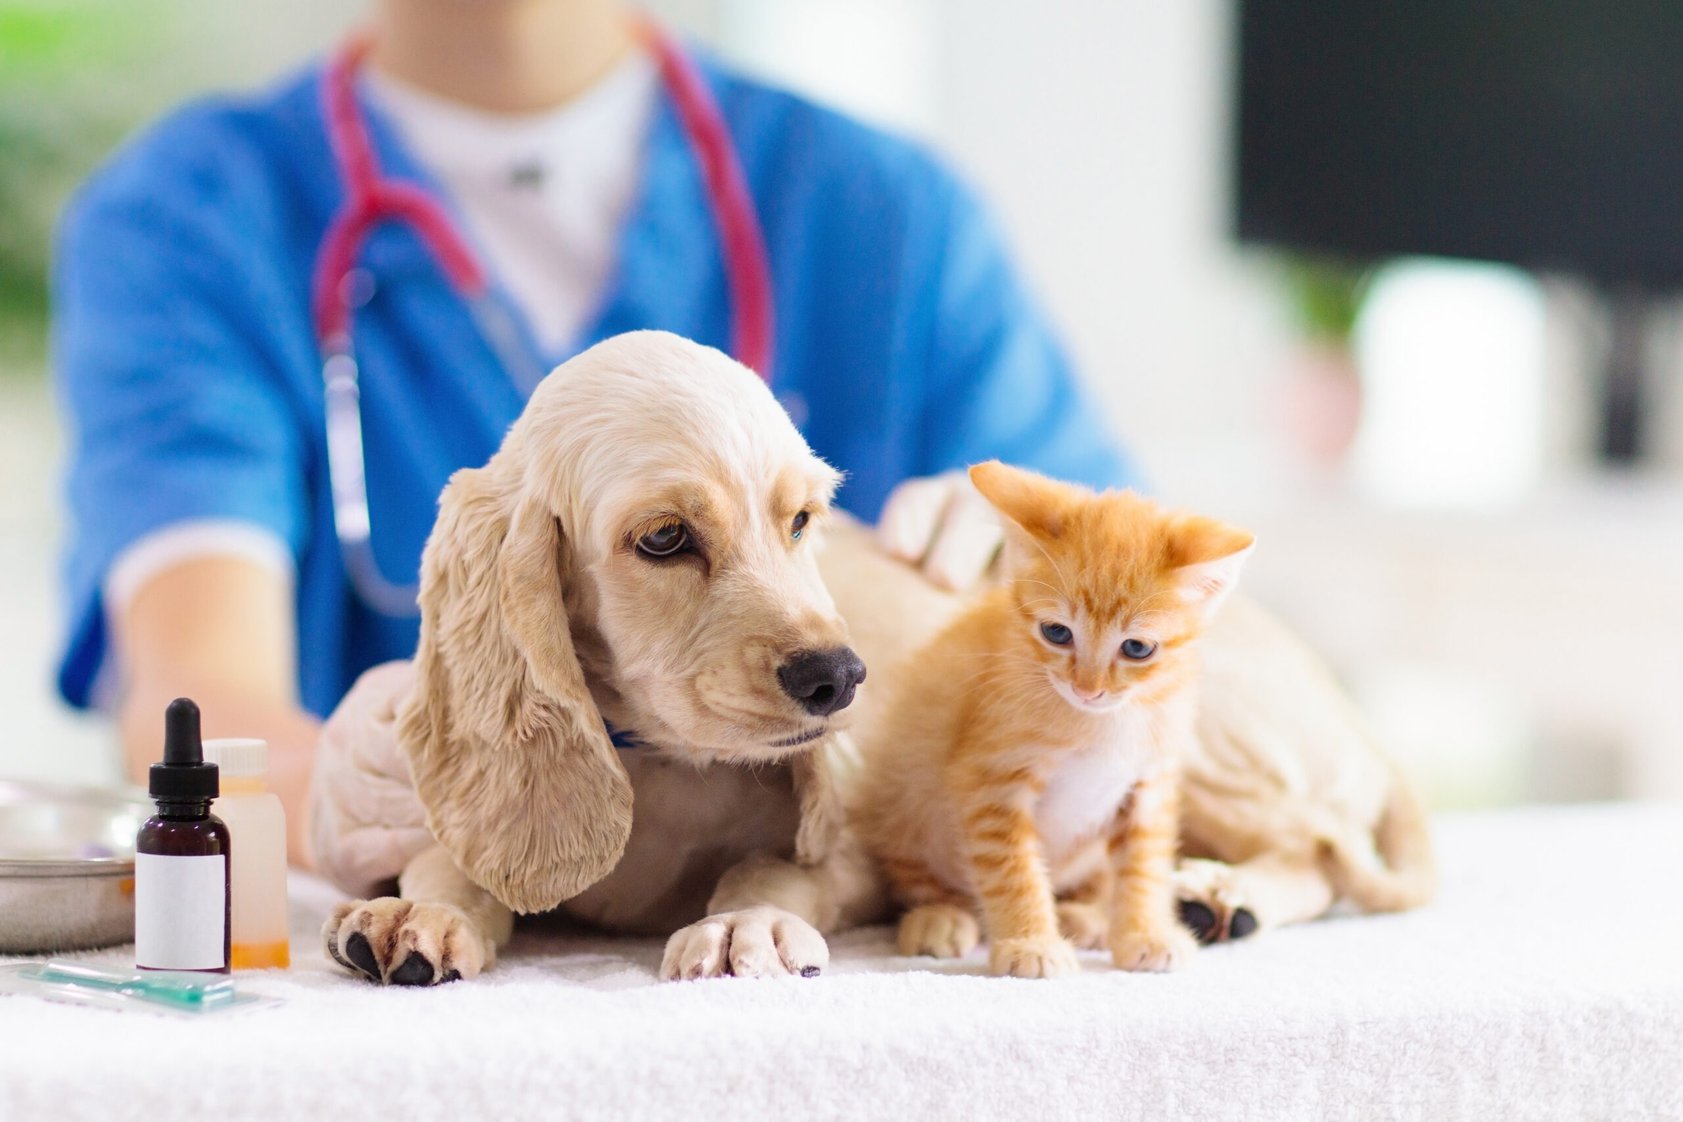 9 Ways to Get Affordable Vet Care - Vet Clinics Near You